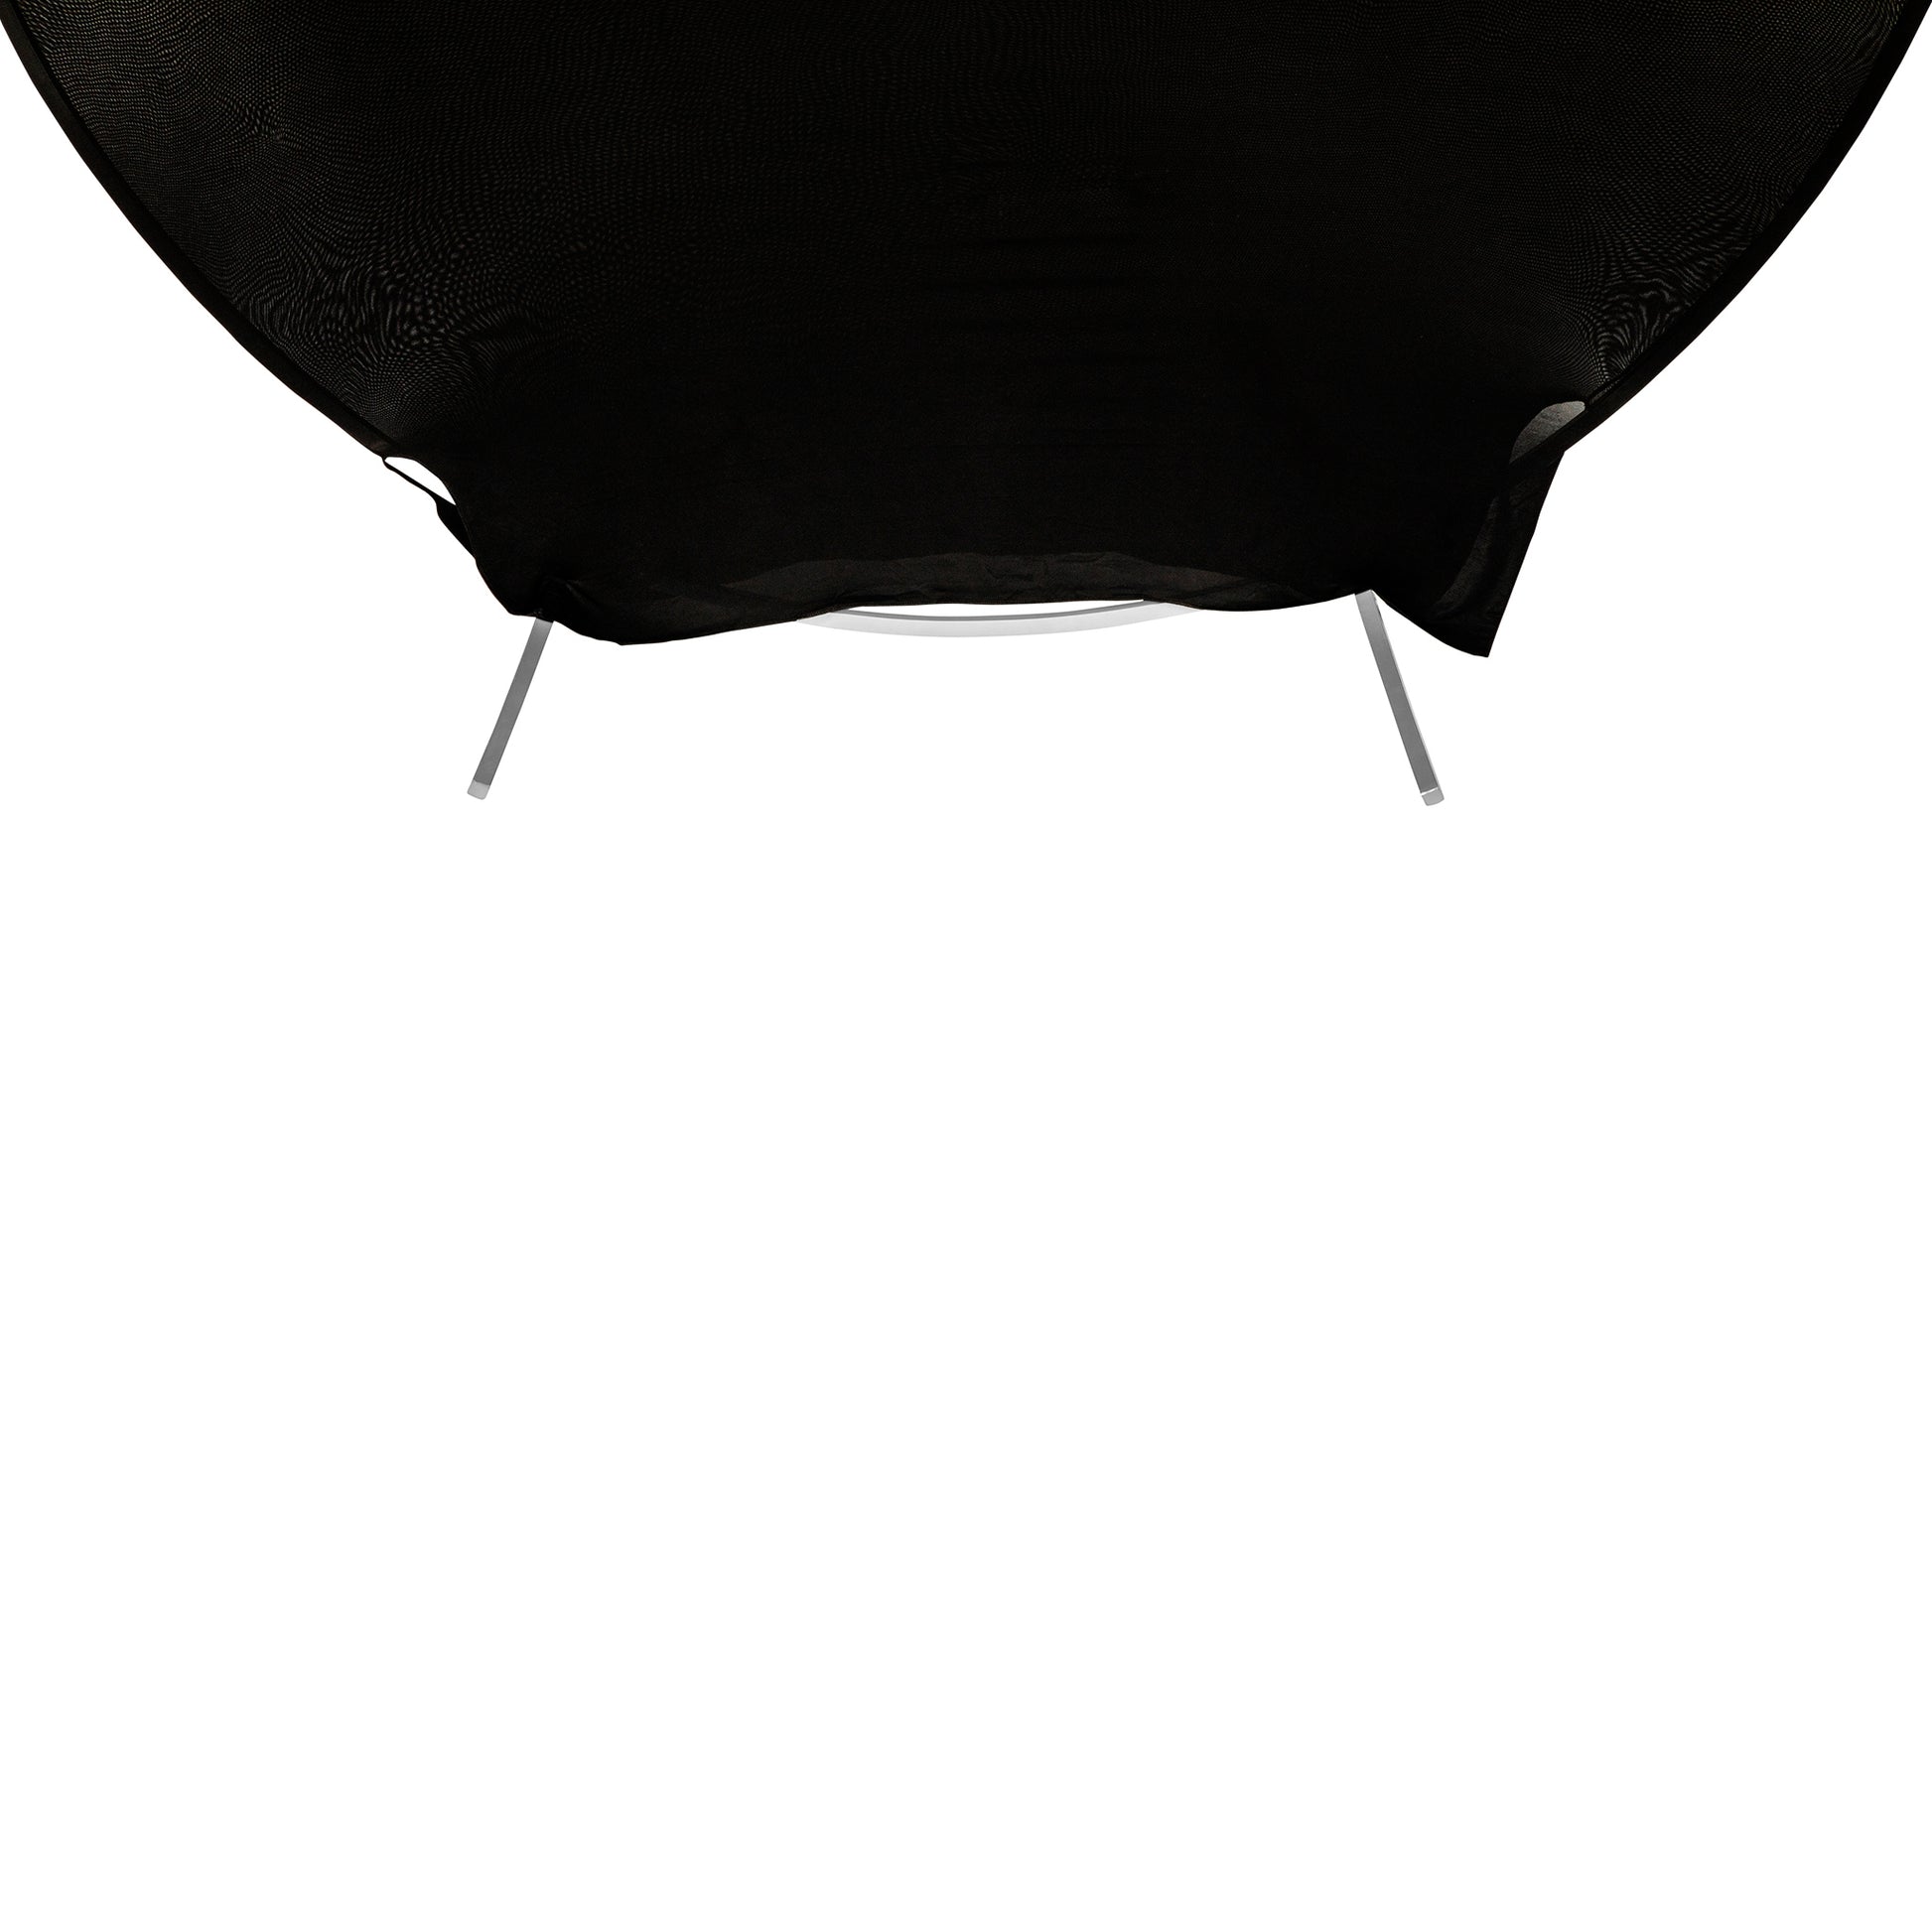 Spandex Arch Cover for Round 7.5 ft Wedding Arch Stand - Black